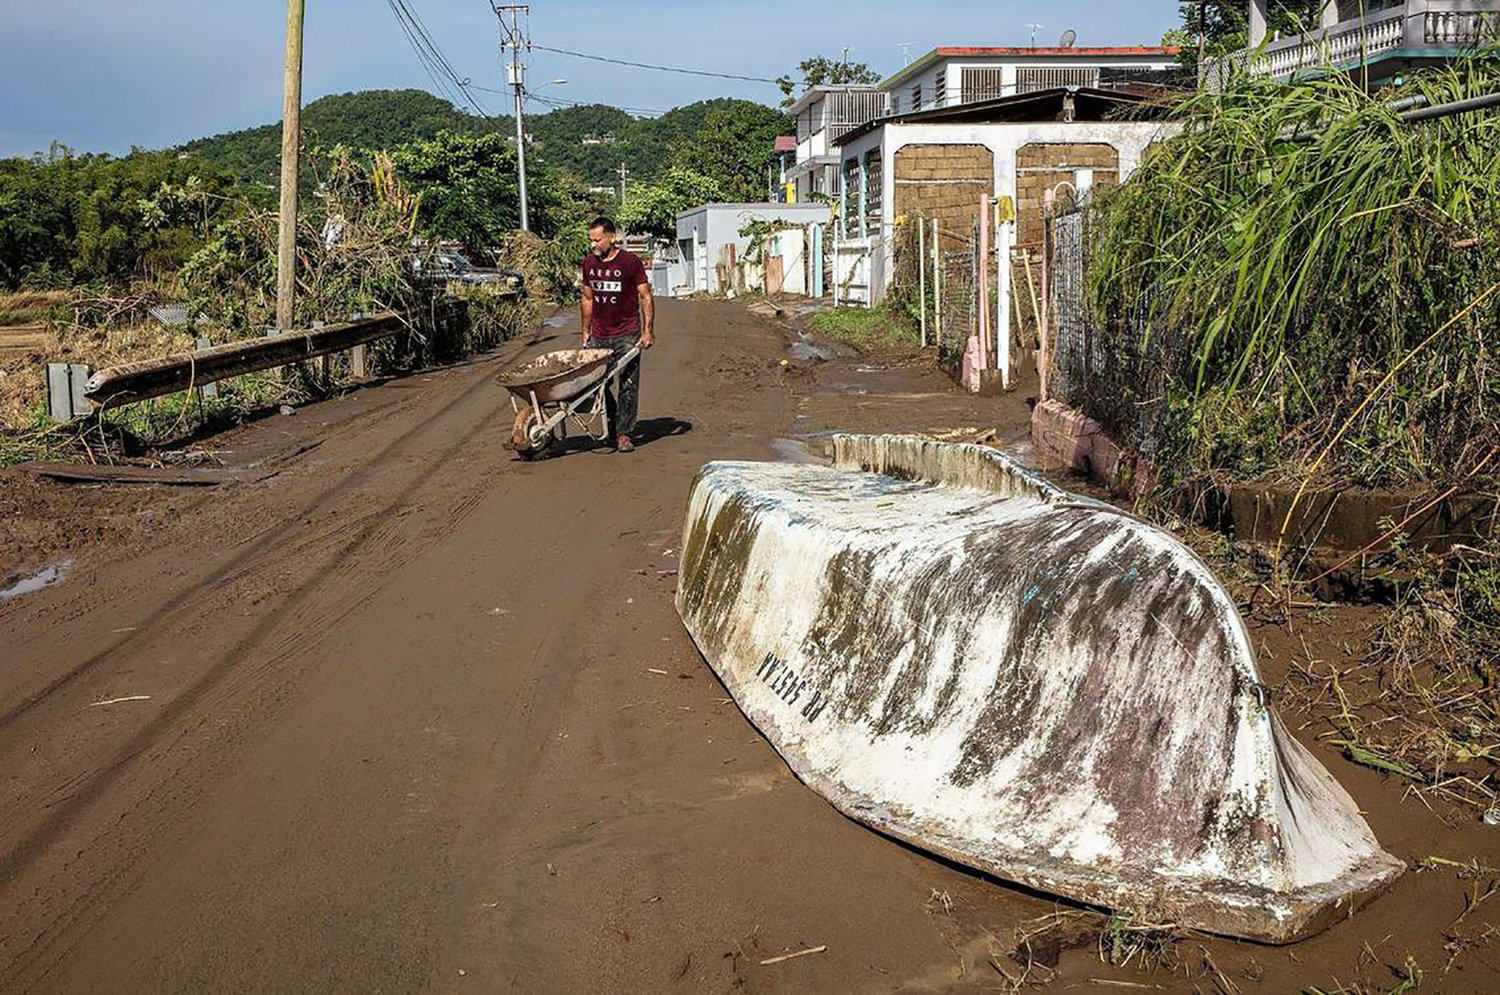 Samuel Santiago removes mud from the front of his house in the San Jose de Toa Baja neighborhood on Tuesday, Sept. 20, 2022, amid flooding after Hurricane Fiona made landfall in Puerto Rico on Sept. 18. (Pedro Portal/El Nuevo Herald/TNS)